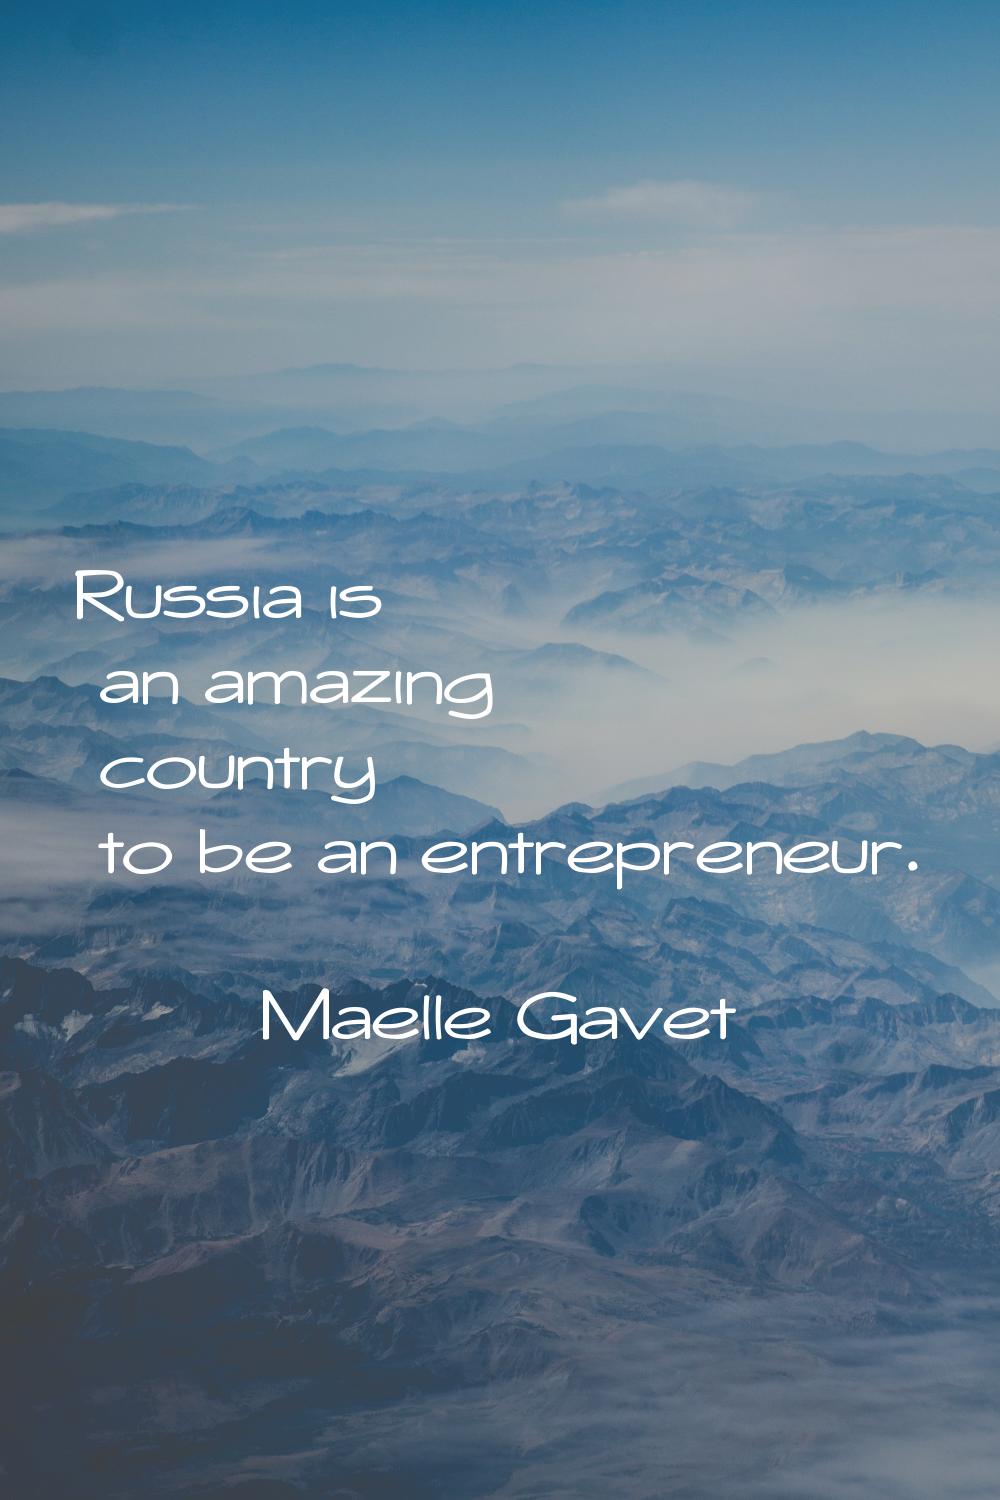 Russia is an amazing country to be an entrepreneur.